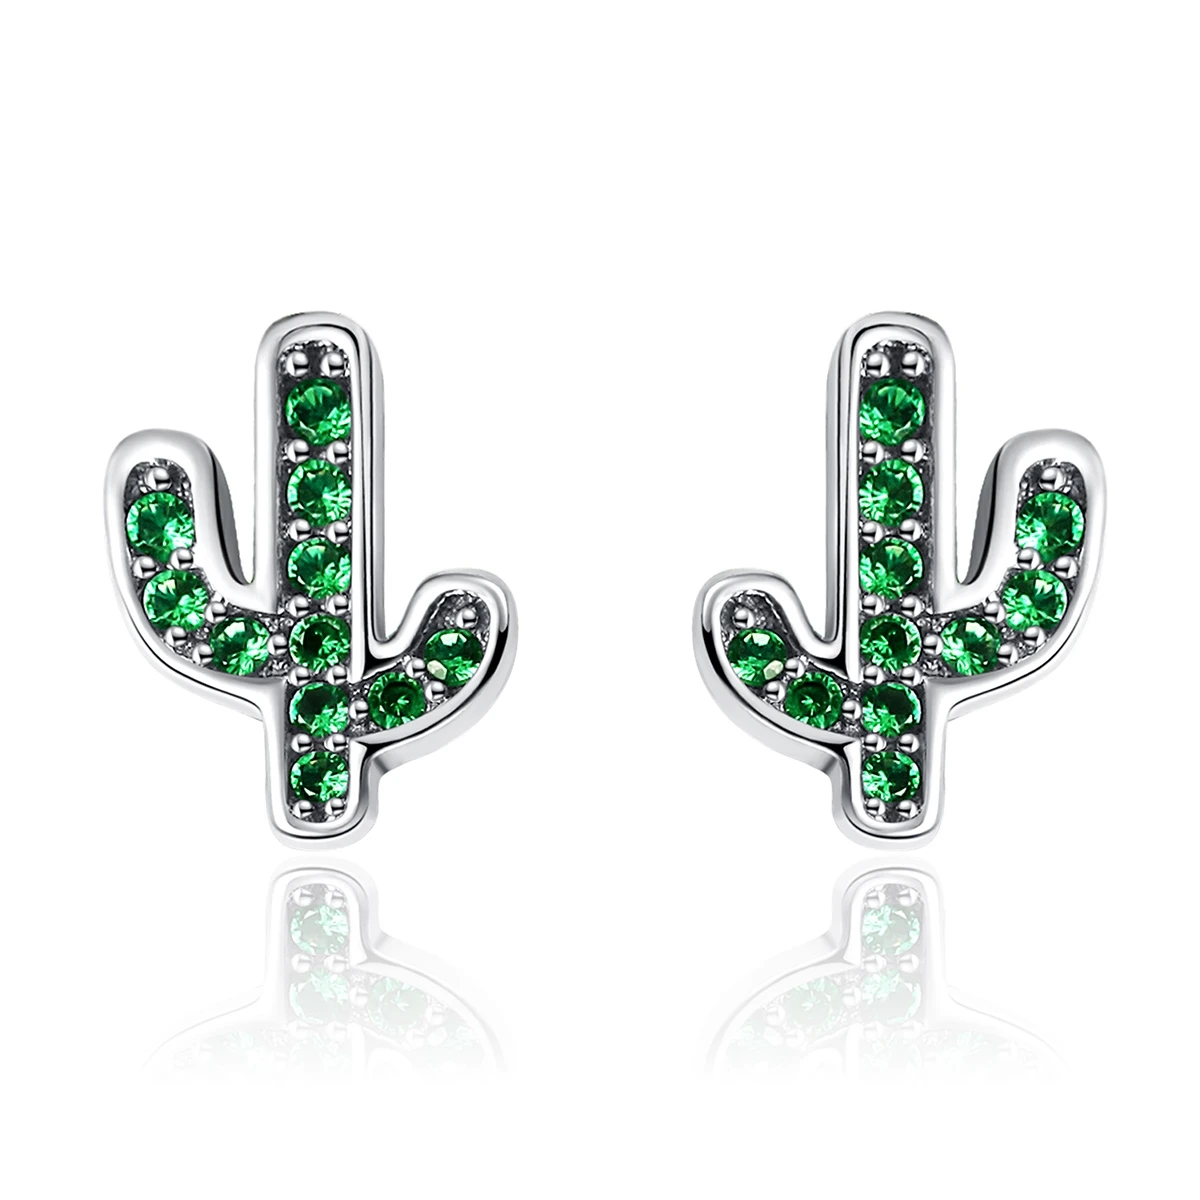 Hot Sale 925 Sterling Silver Dazzling Green Cactus Crystal Stud Earrings for Wom - $22.86